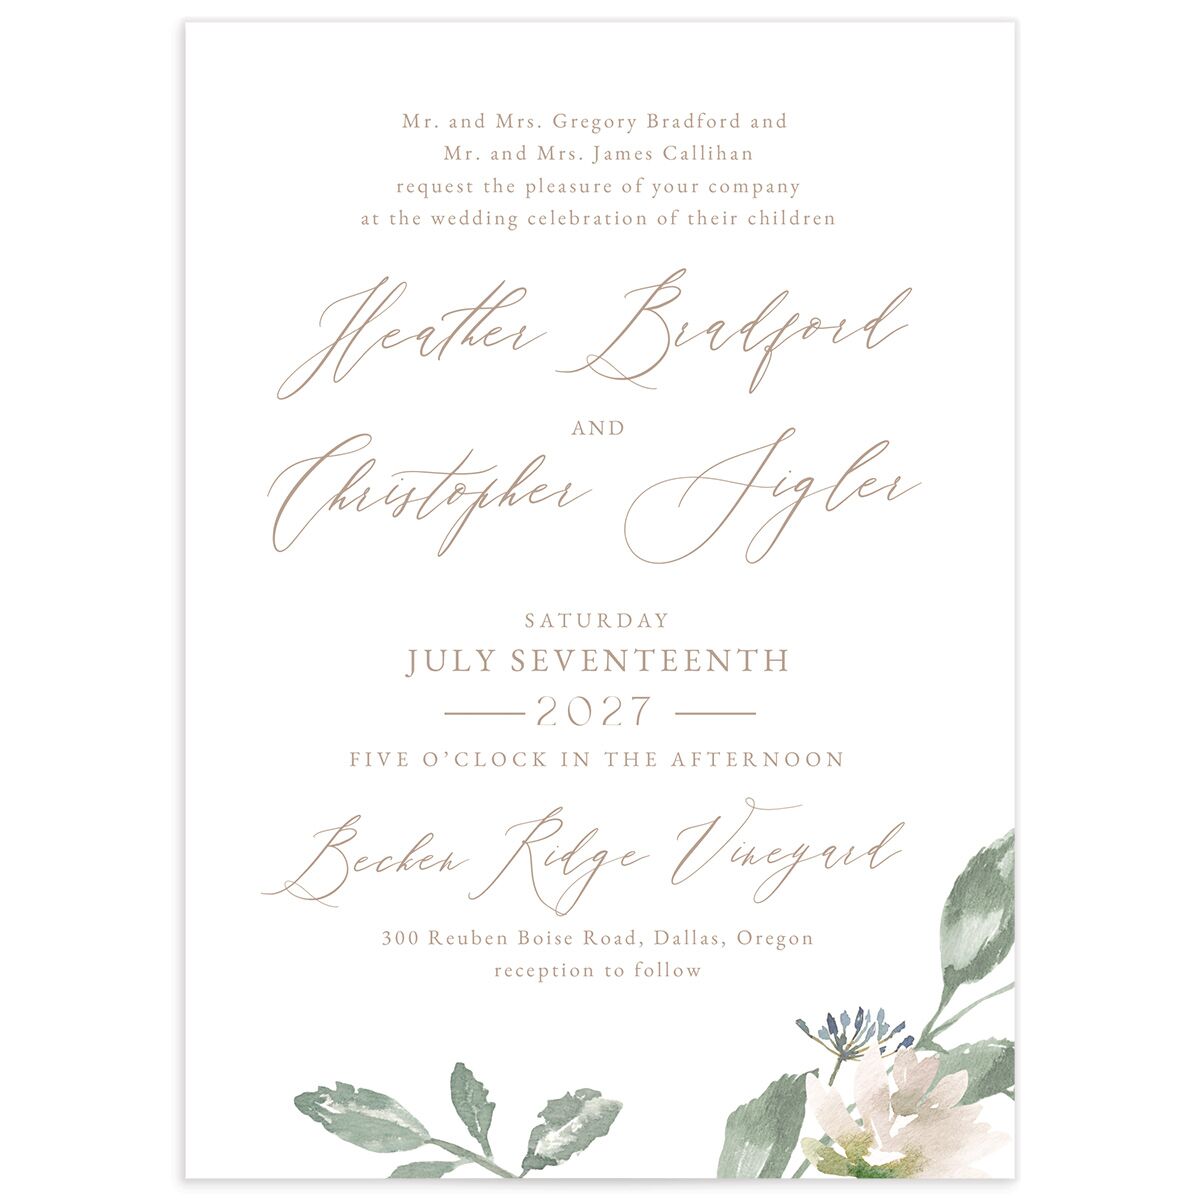 Dusted Calligraphy Wedding Invitations